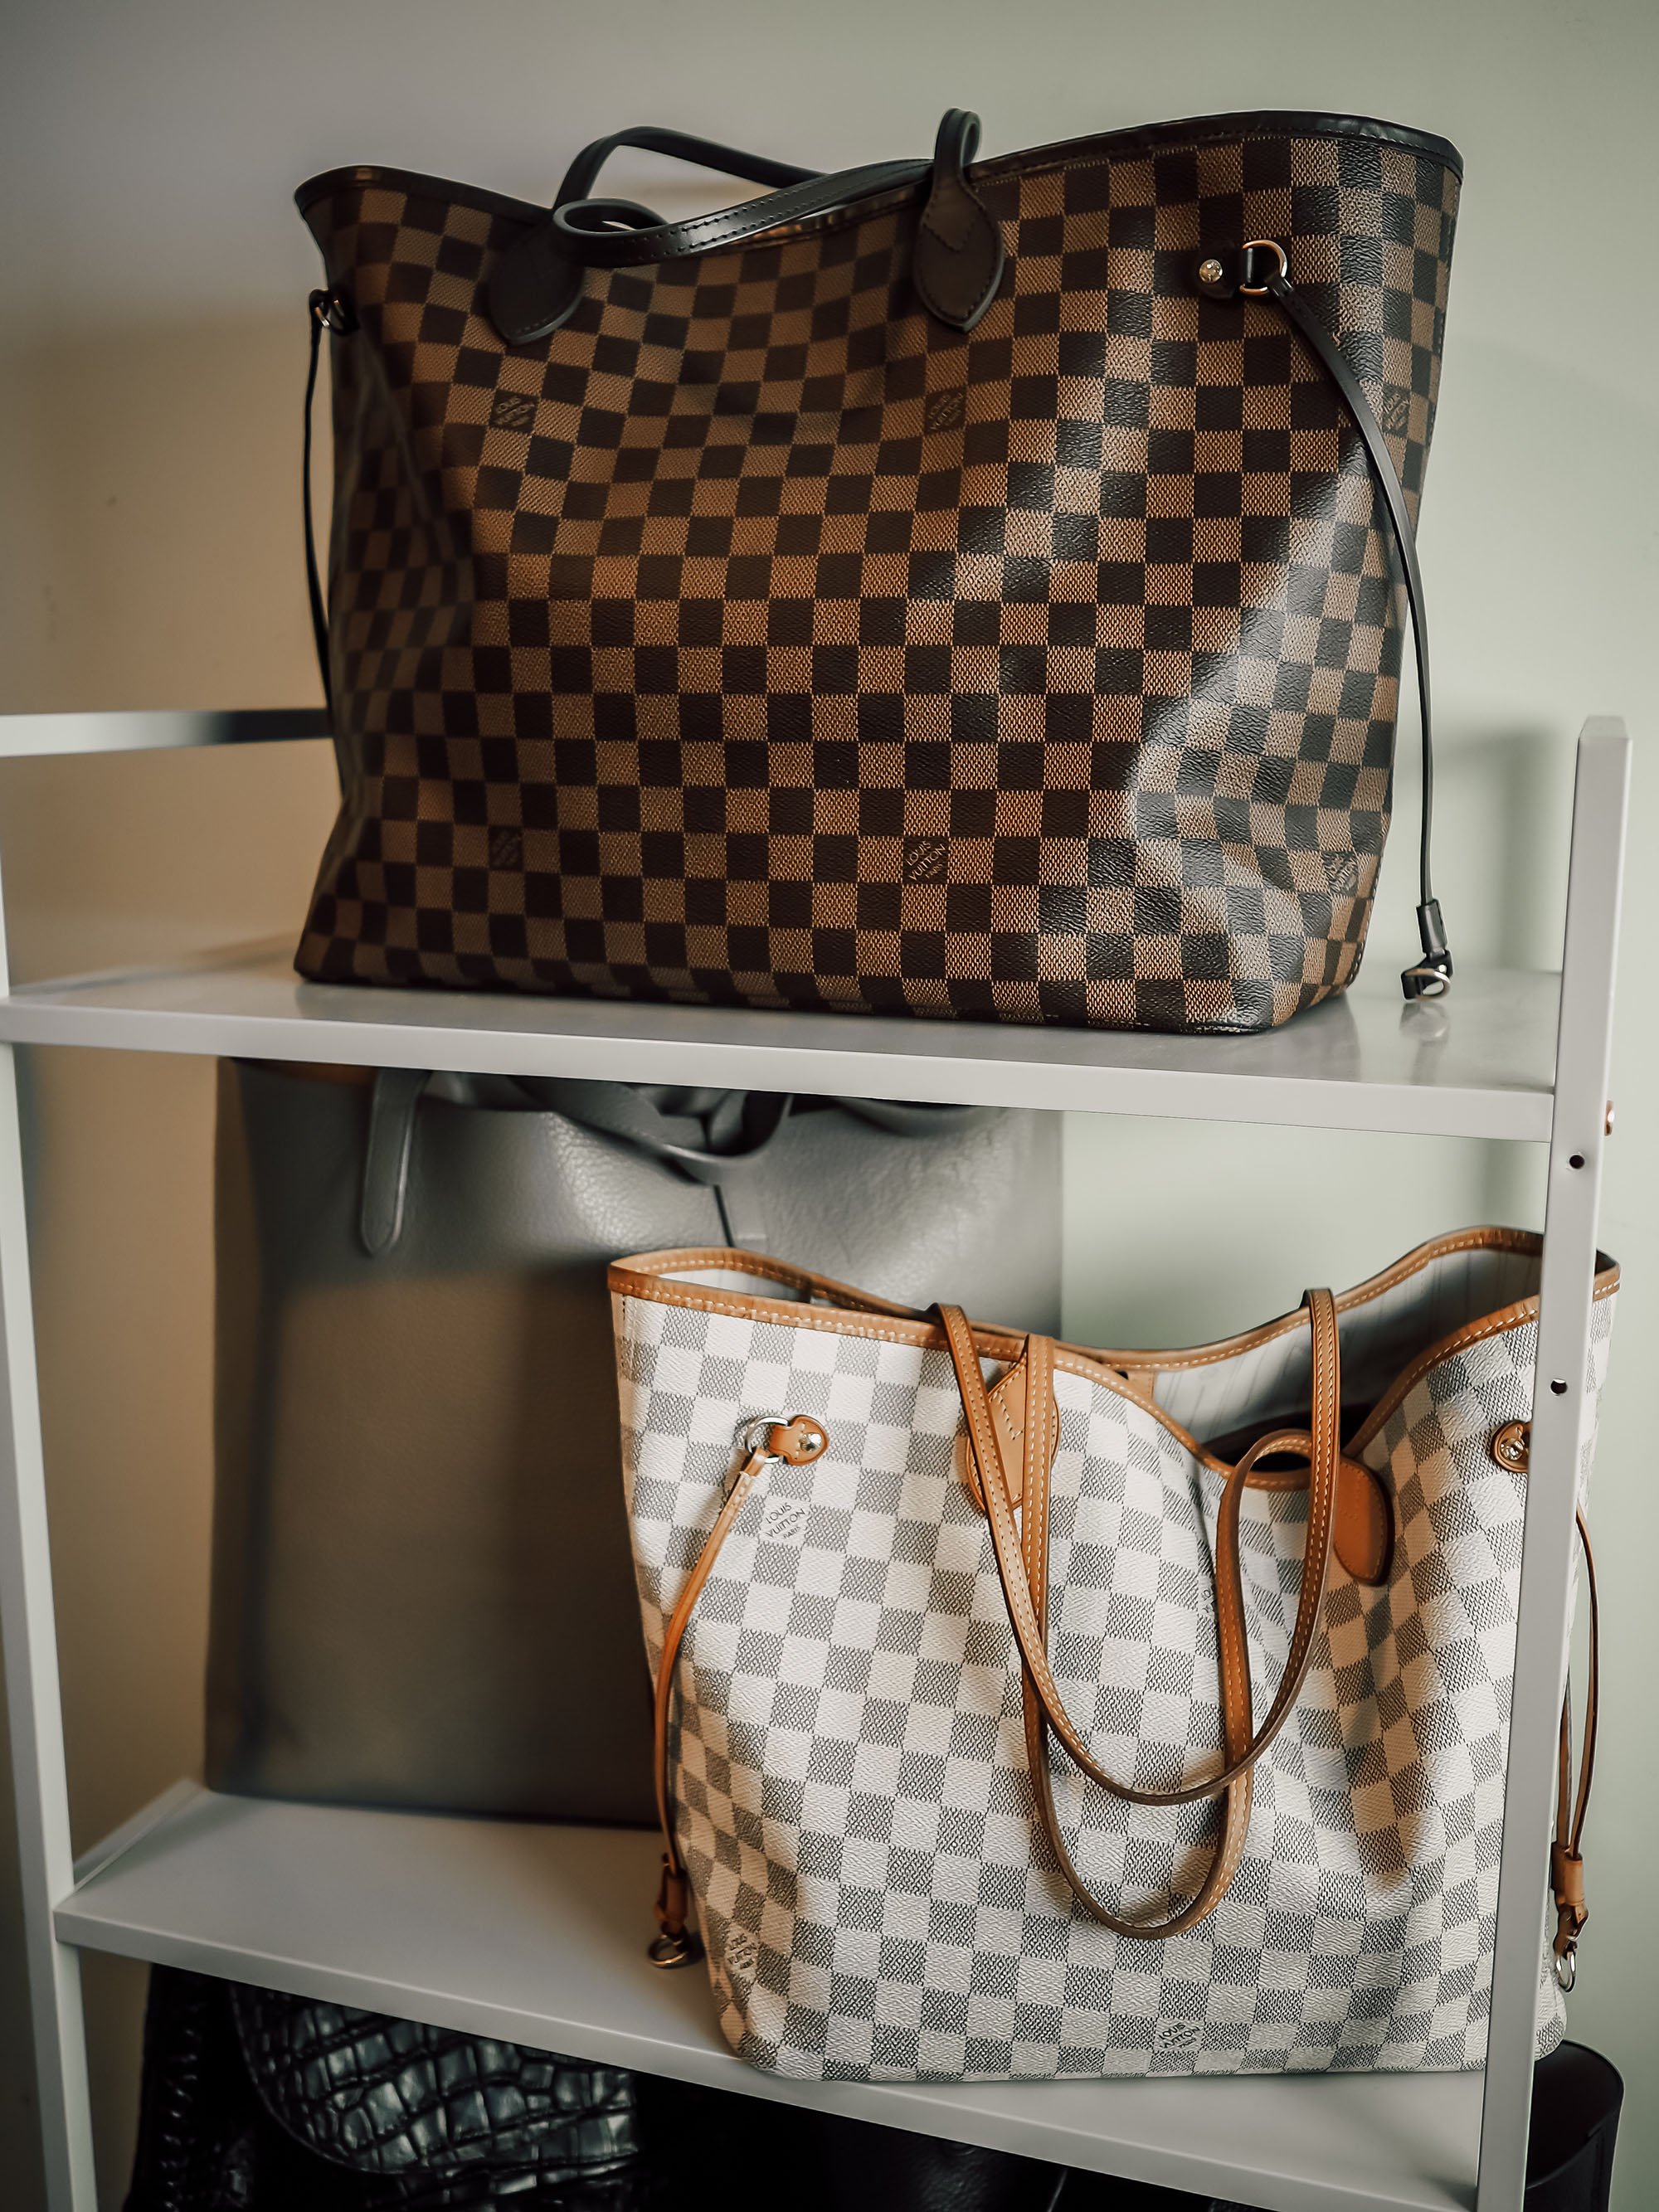 The Best Handbags to Take to Work - by Kelsey Boyanzhu